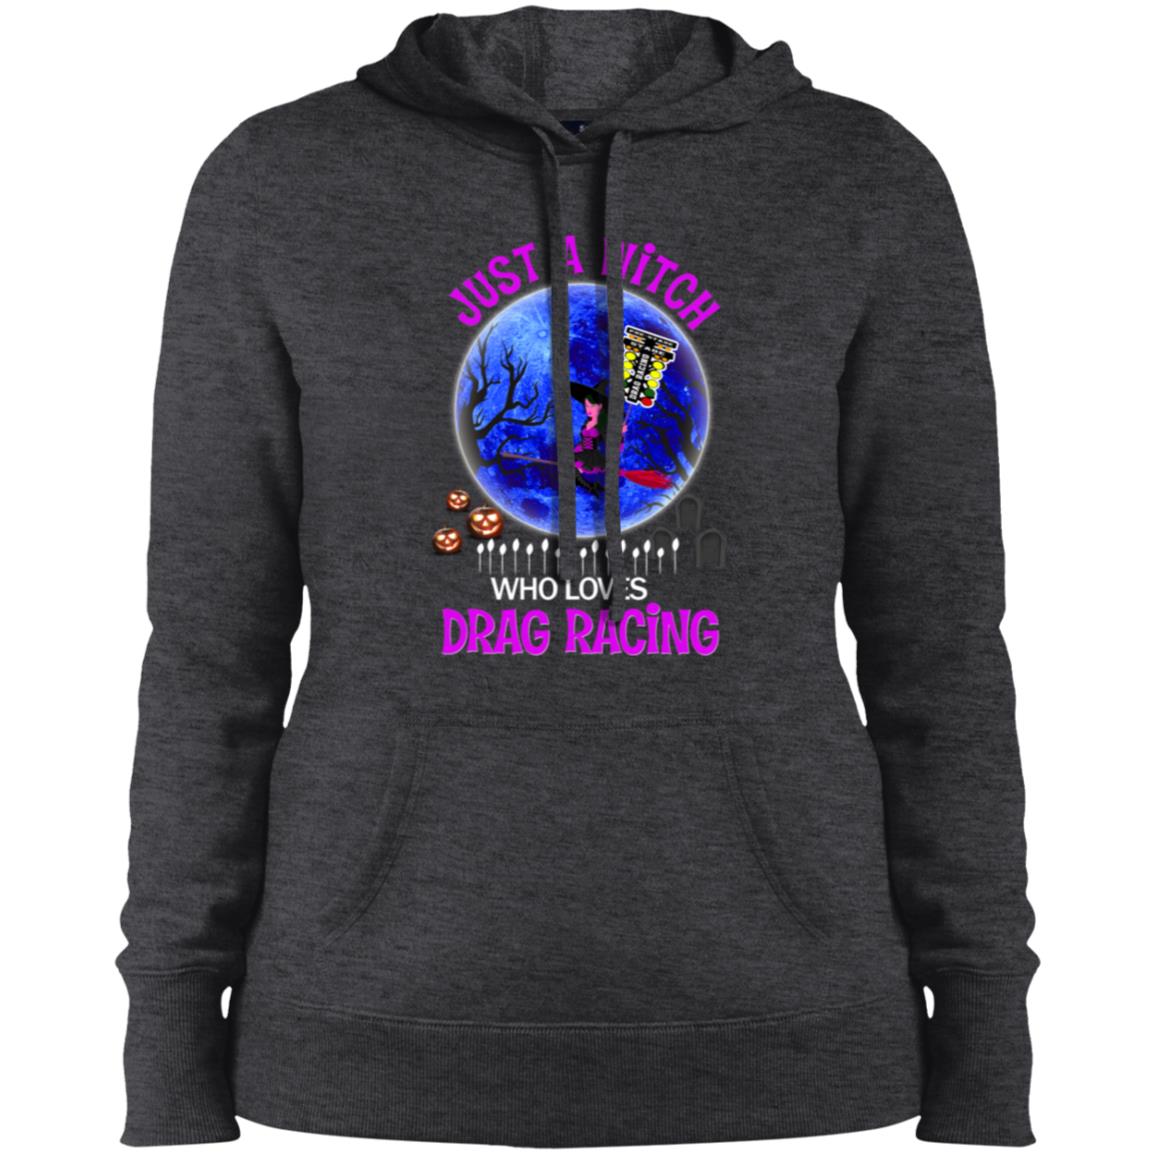 Just A Witch Who Loves Drag Racing Ladies' Pullover Hooded Sweatshirt